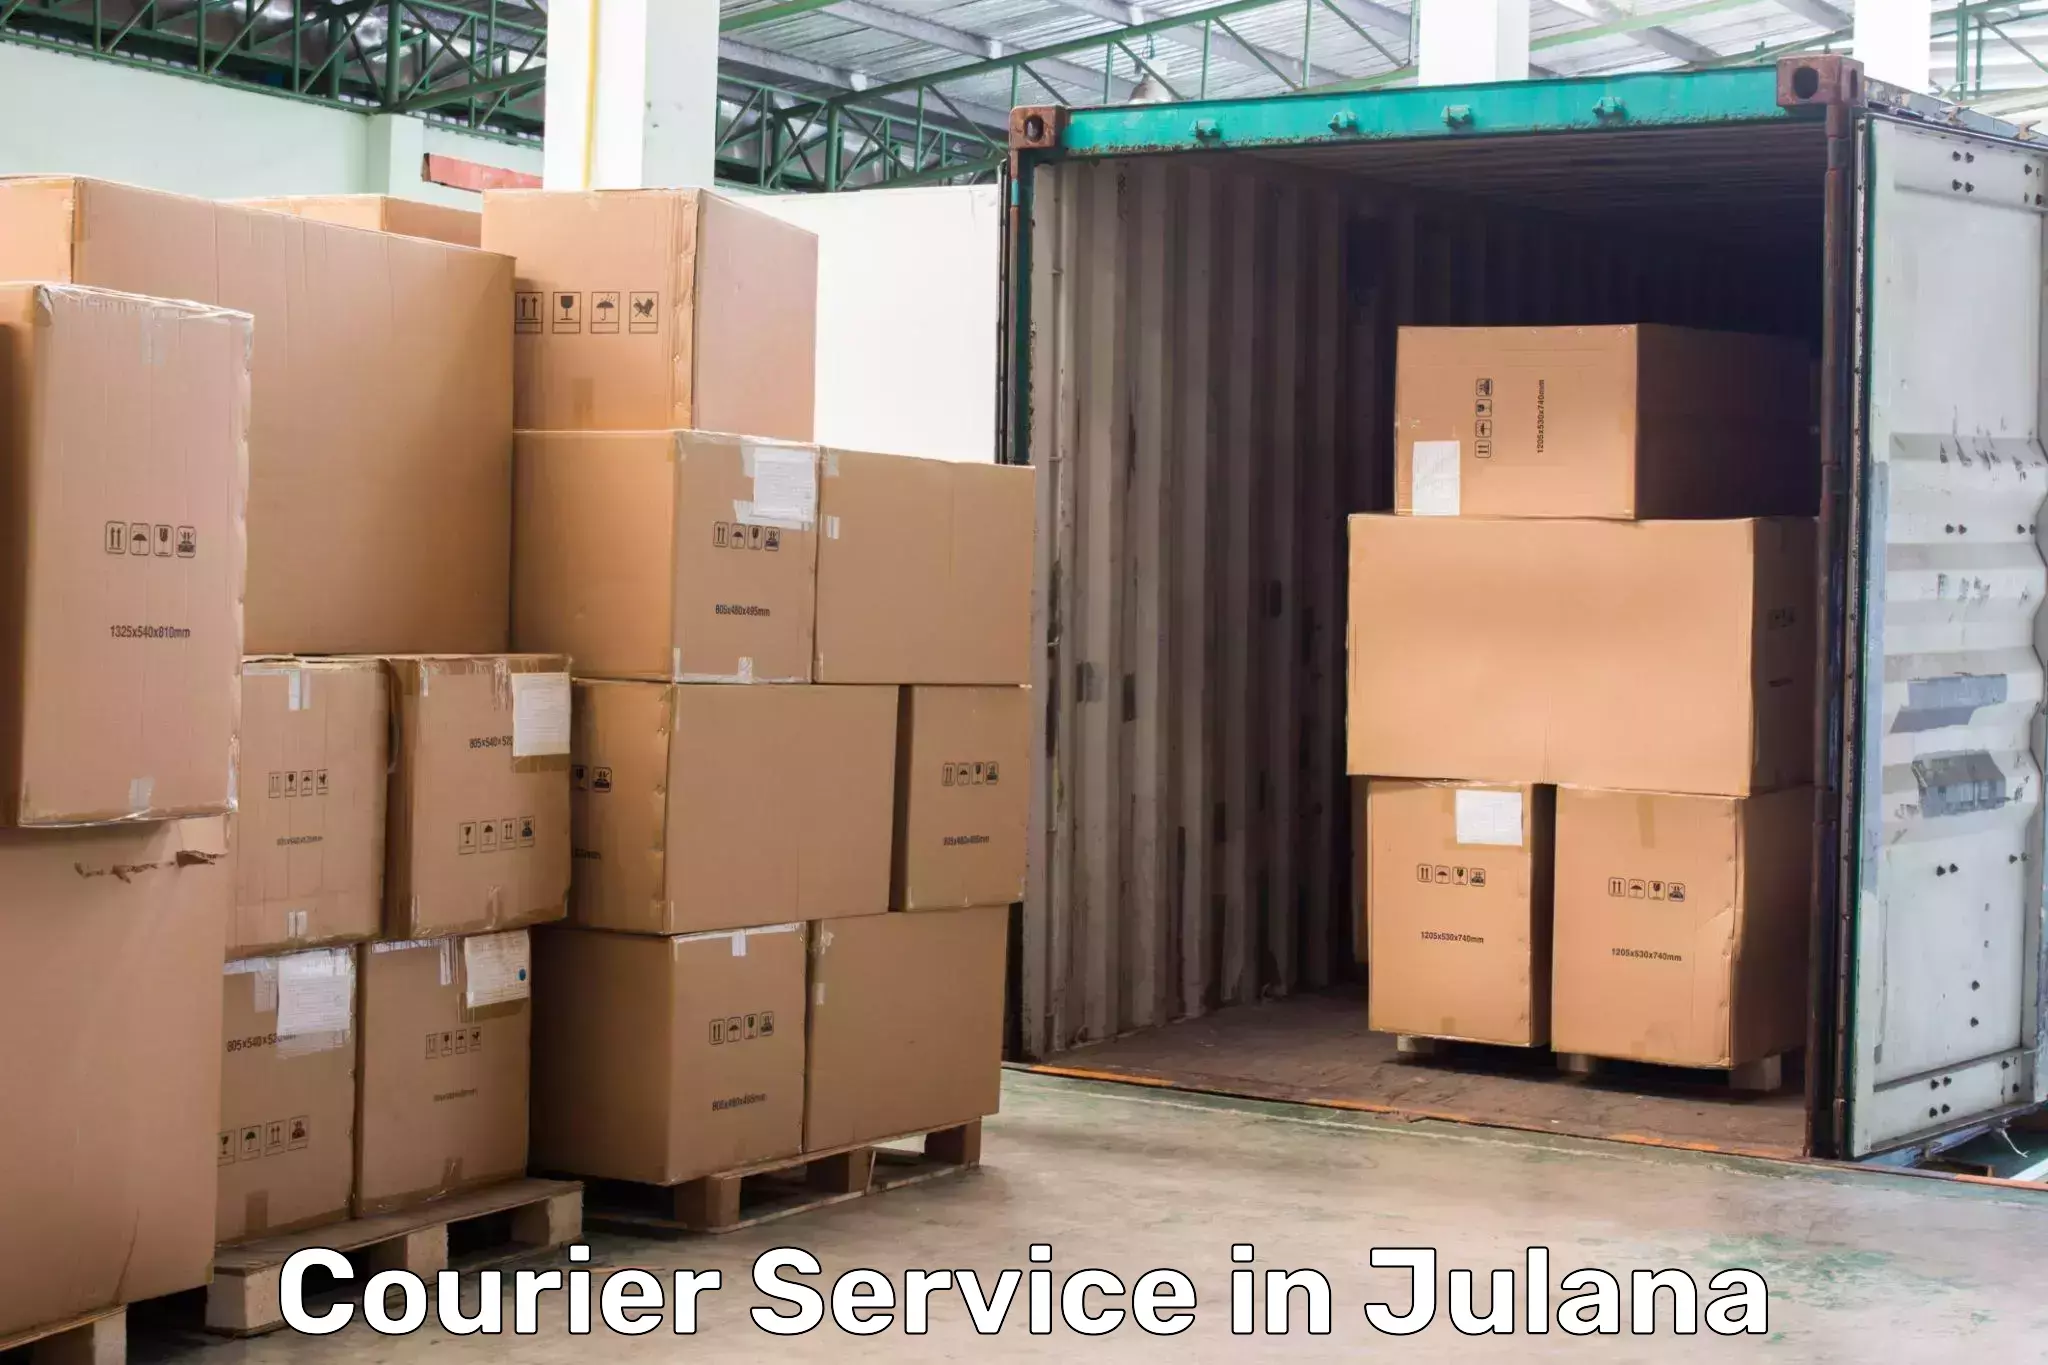 Overnight delivery services in Julana